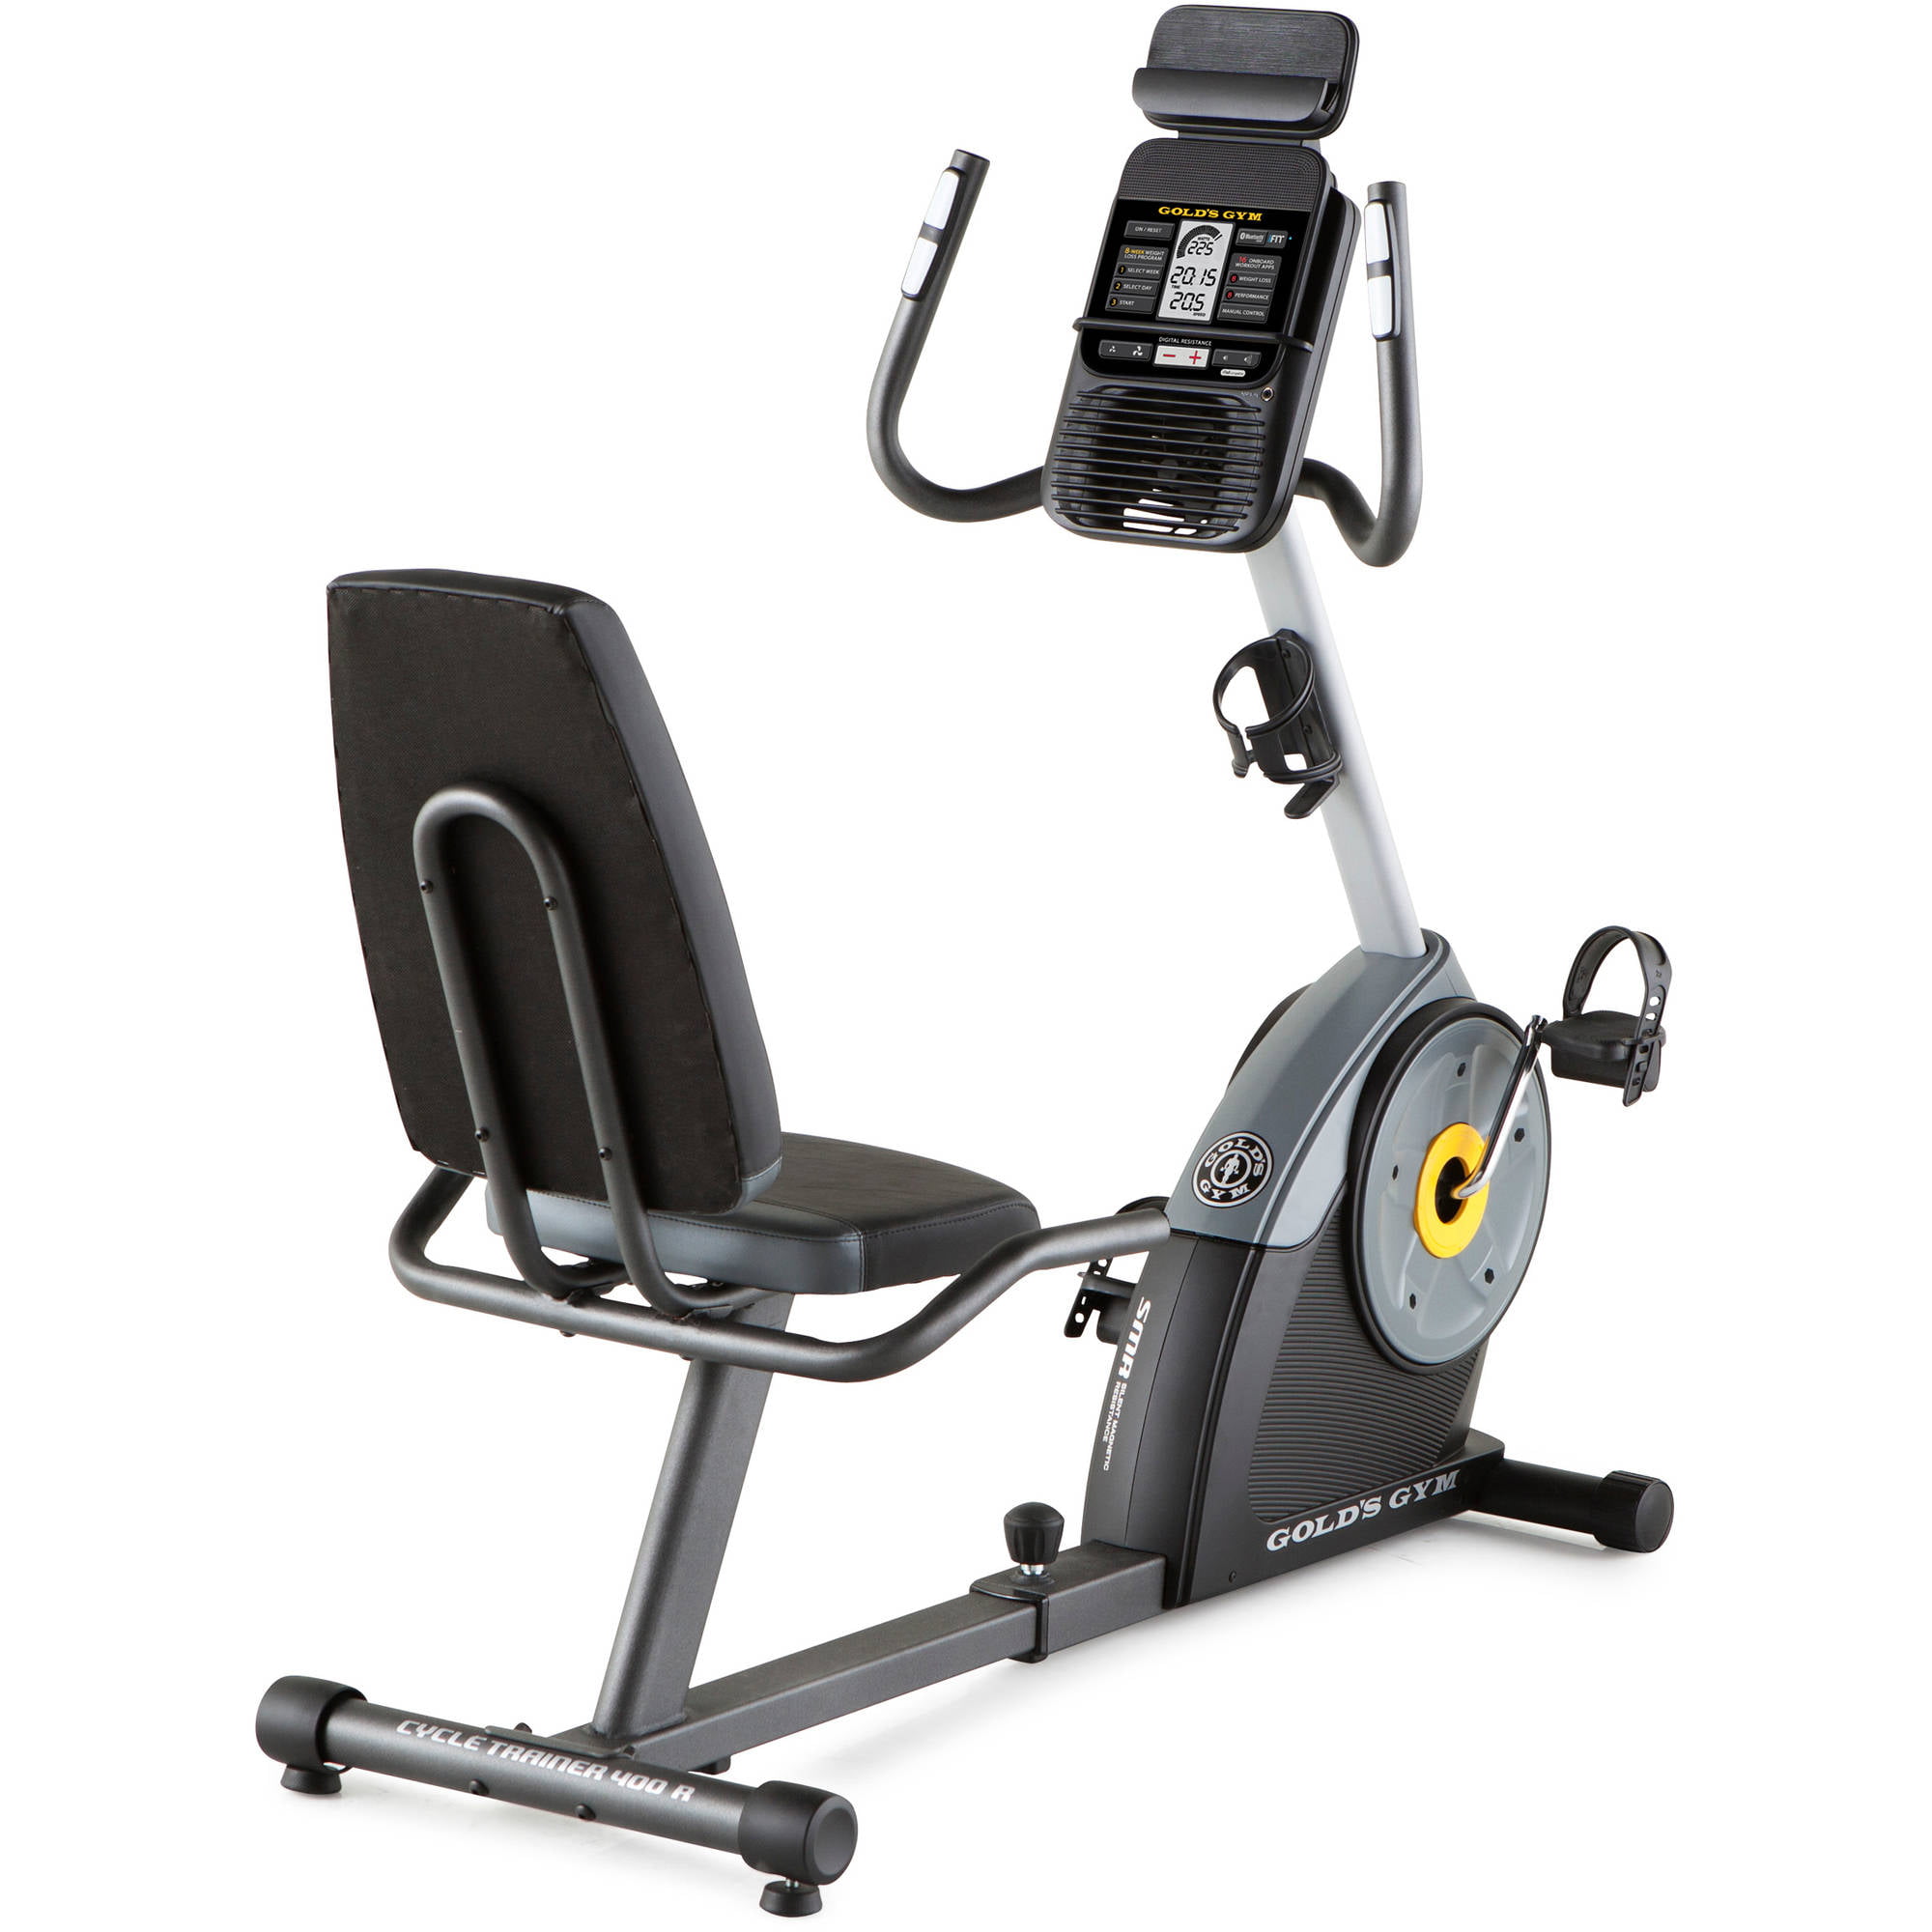 Golds Gym Cycle Trainer 400 Ri Recumbent Exercise Bike Walmart throughout Cycling Trainer Benefits